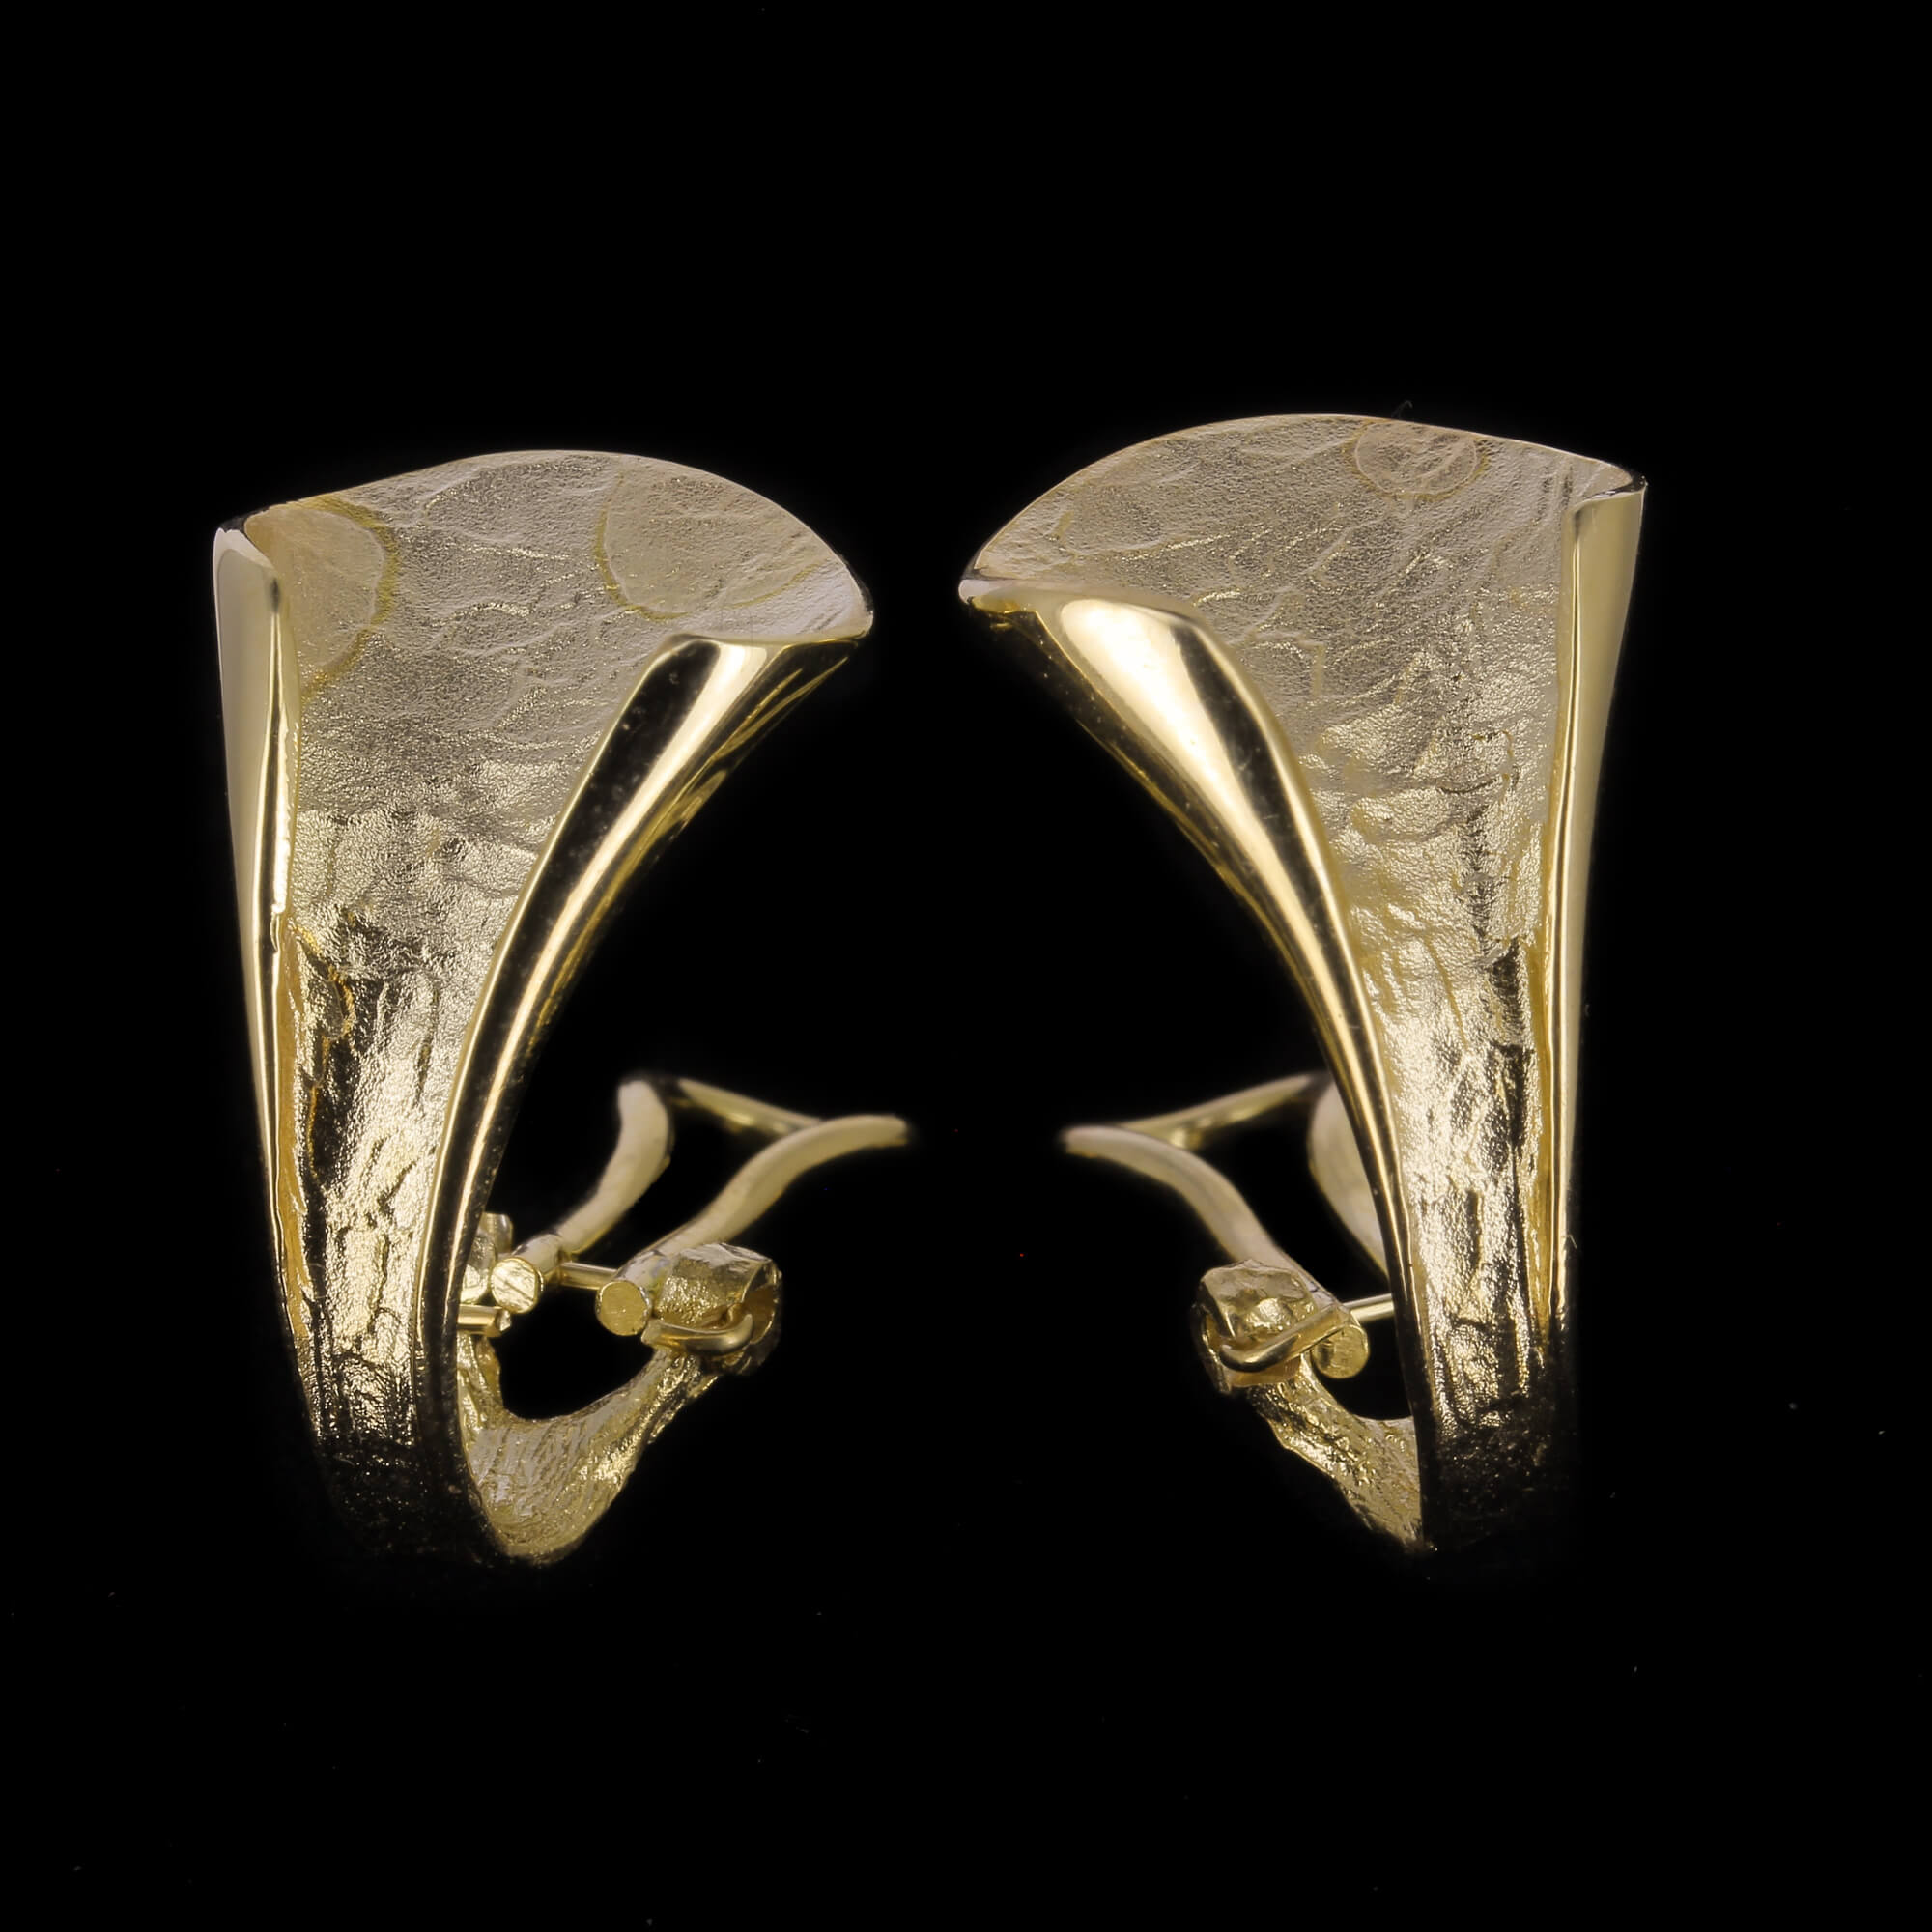 Gold-plated and polished earrings in V-form